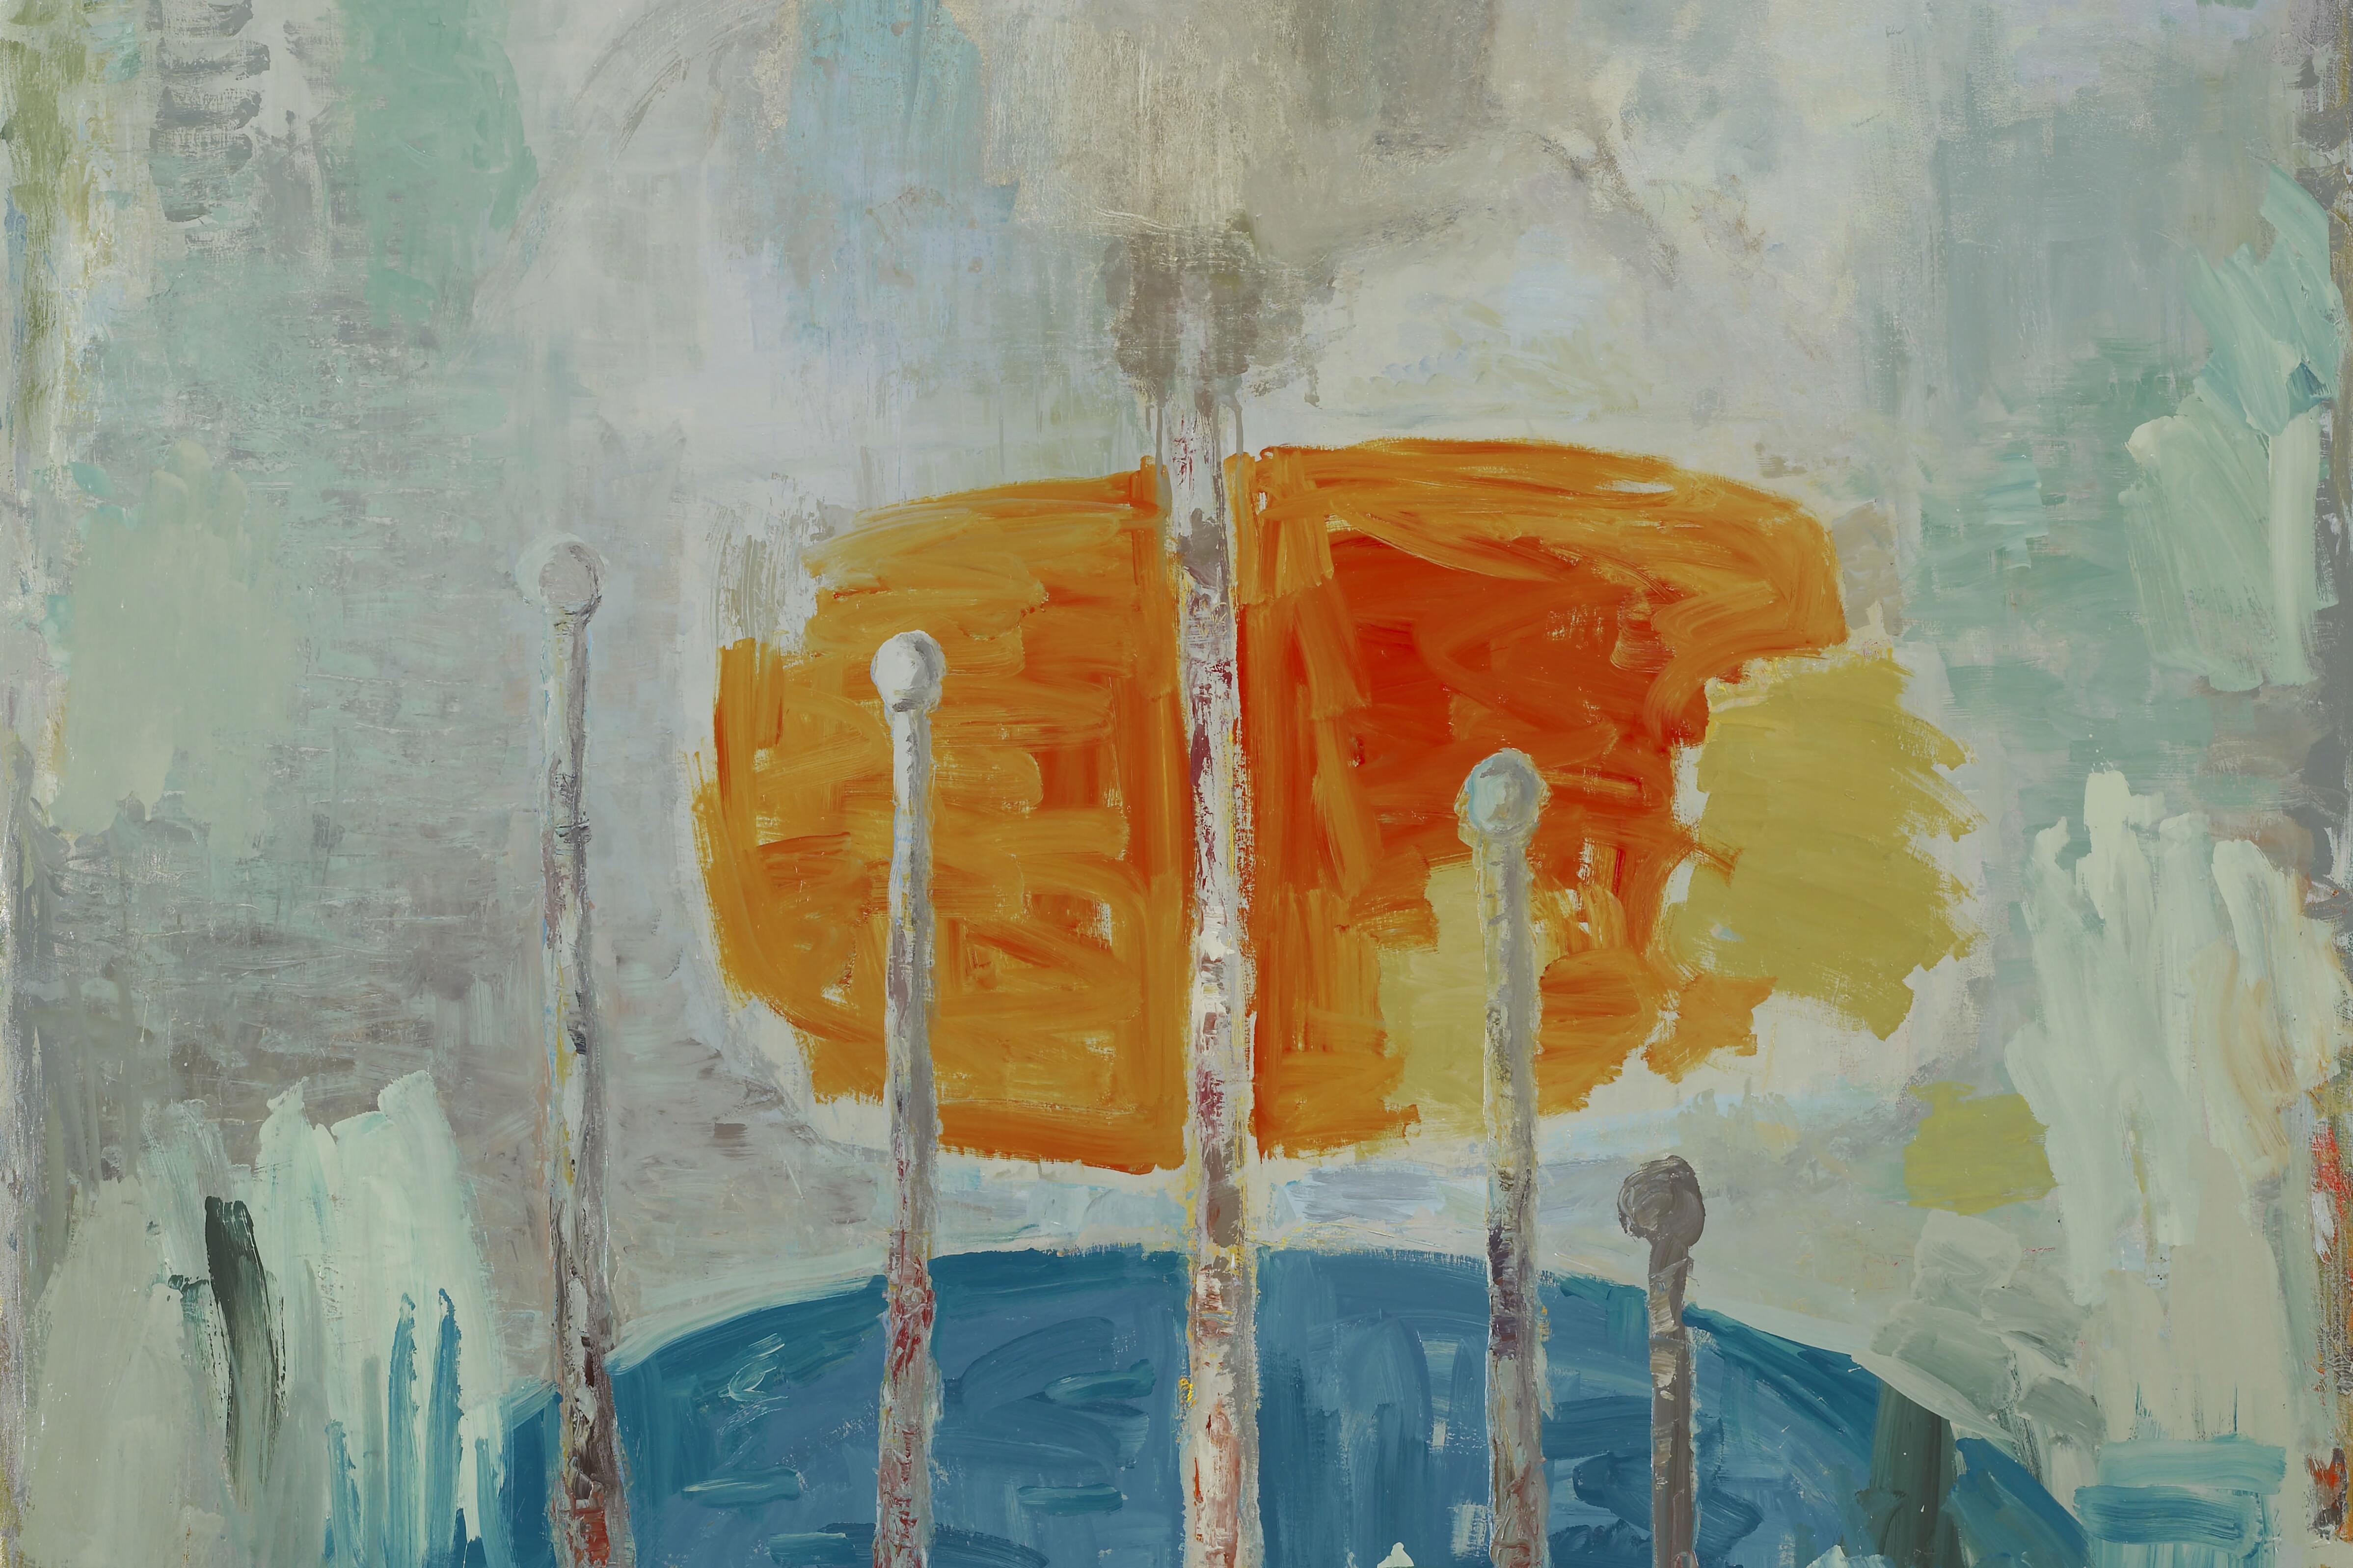 Christopher Le Brun, <i>Belvedere</i>, 2011, oil on canvas, 240 x 180 cm. Collection of The Artist. Photo: Stephen White, 2011 (All rights reserved).